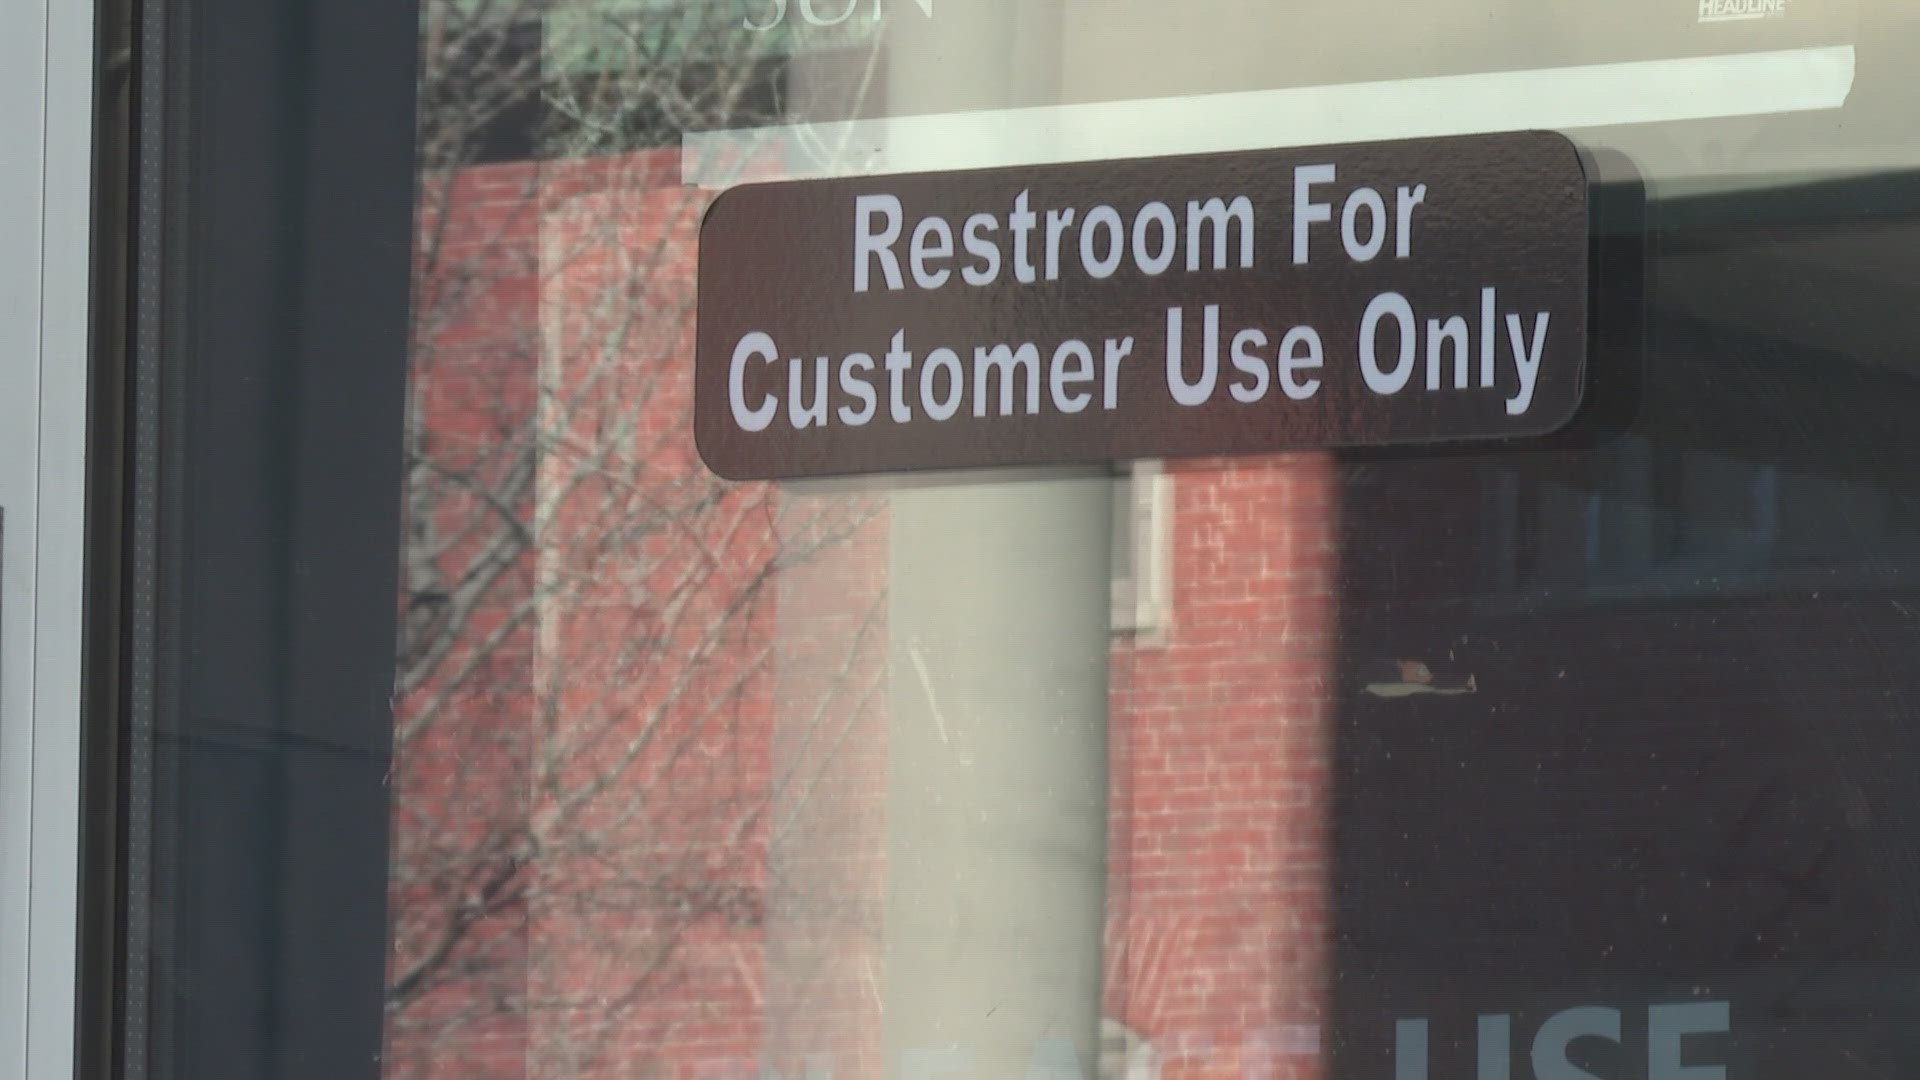 Communities around Maine are now talking about ways to improve access to public restrooms for tourists and locals alike.